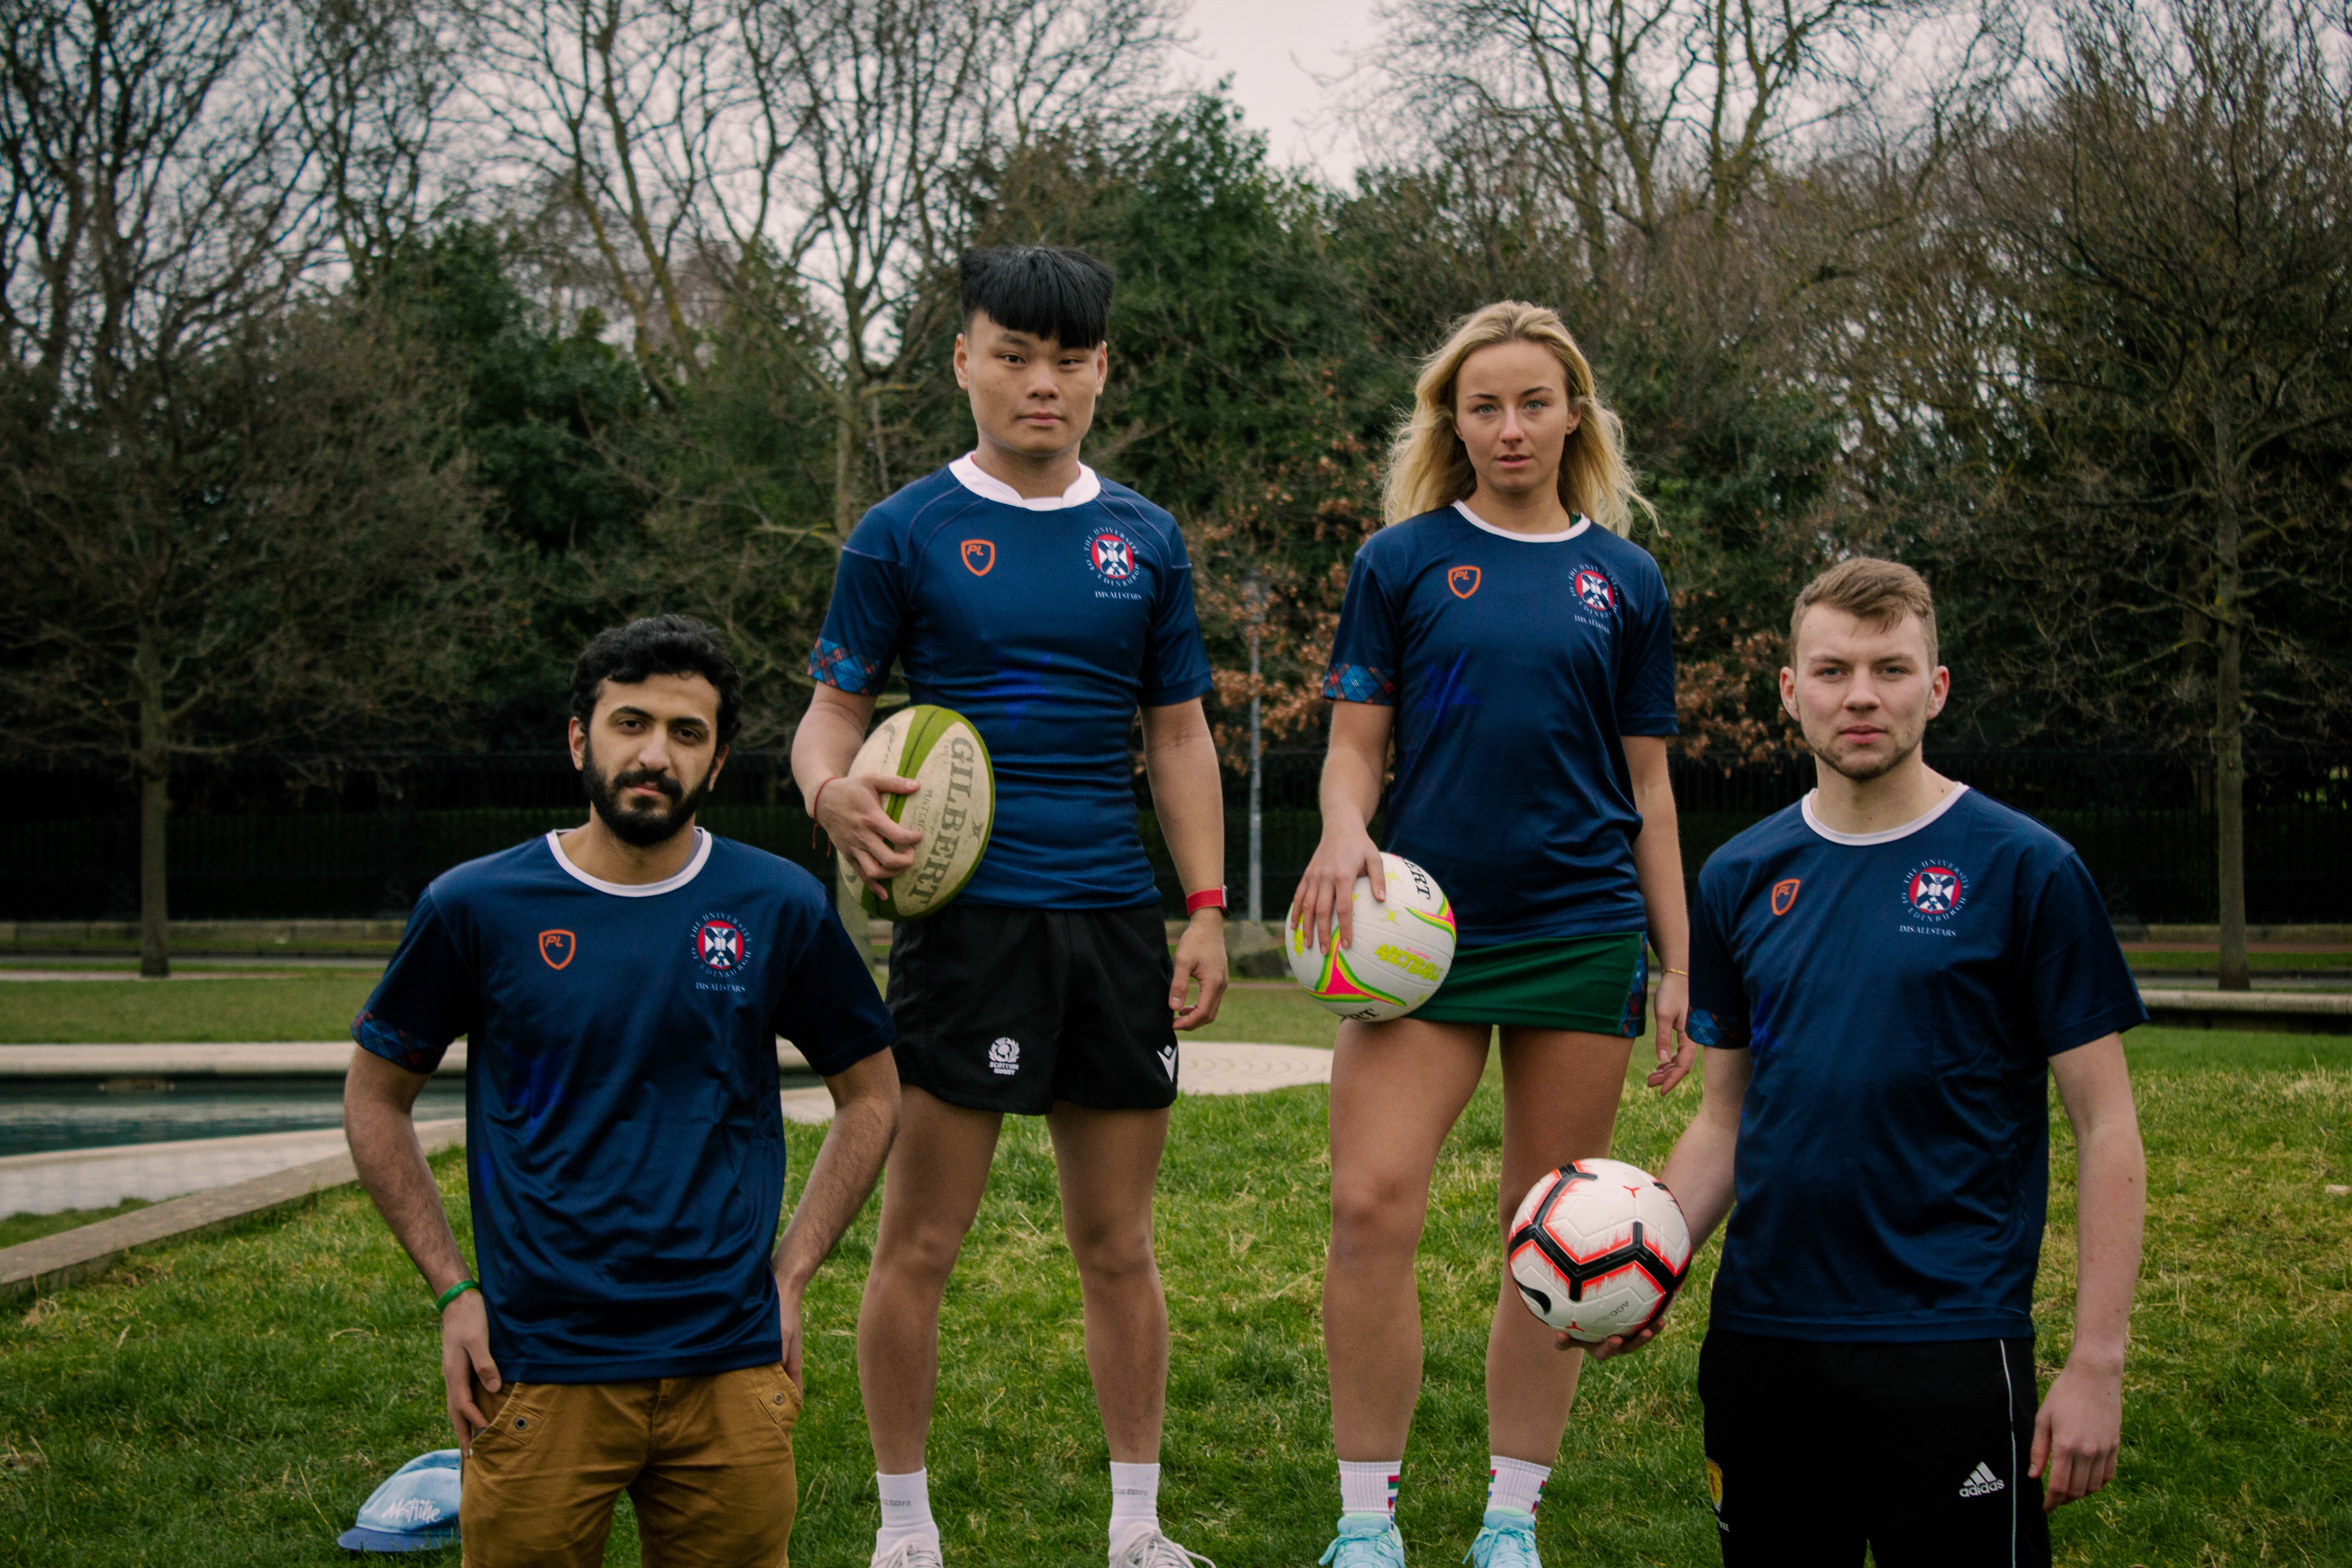 Four students posing wearing dark blue t-shirts, holding a rugby ball, a netball, and a football